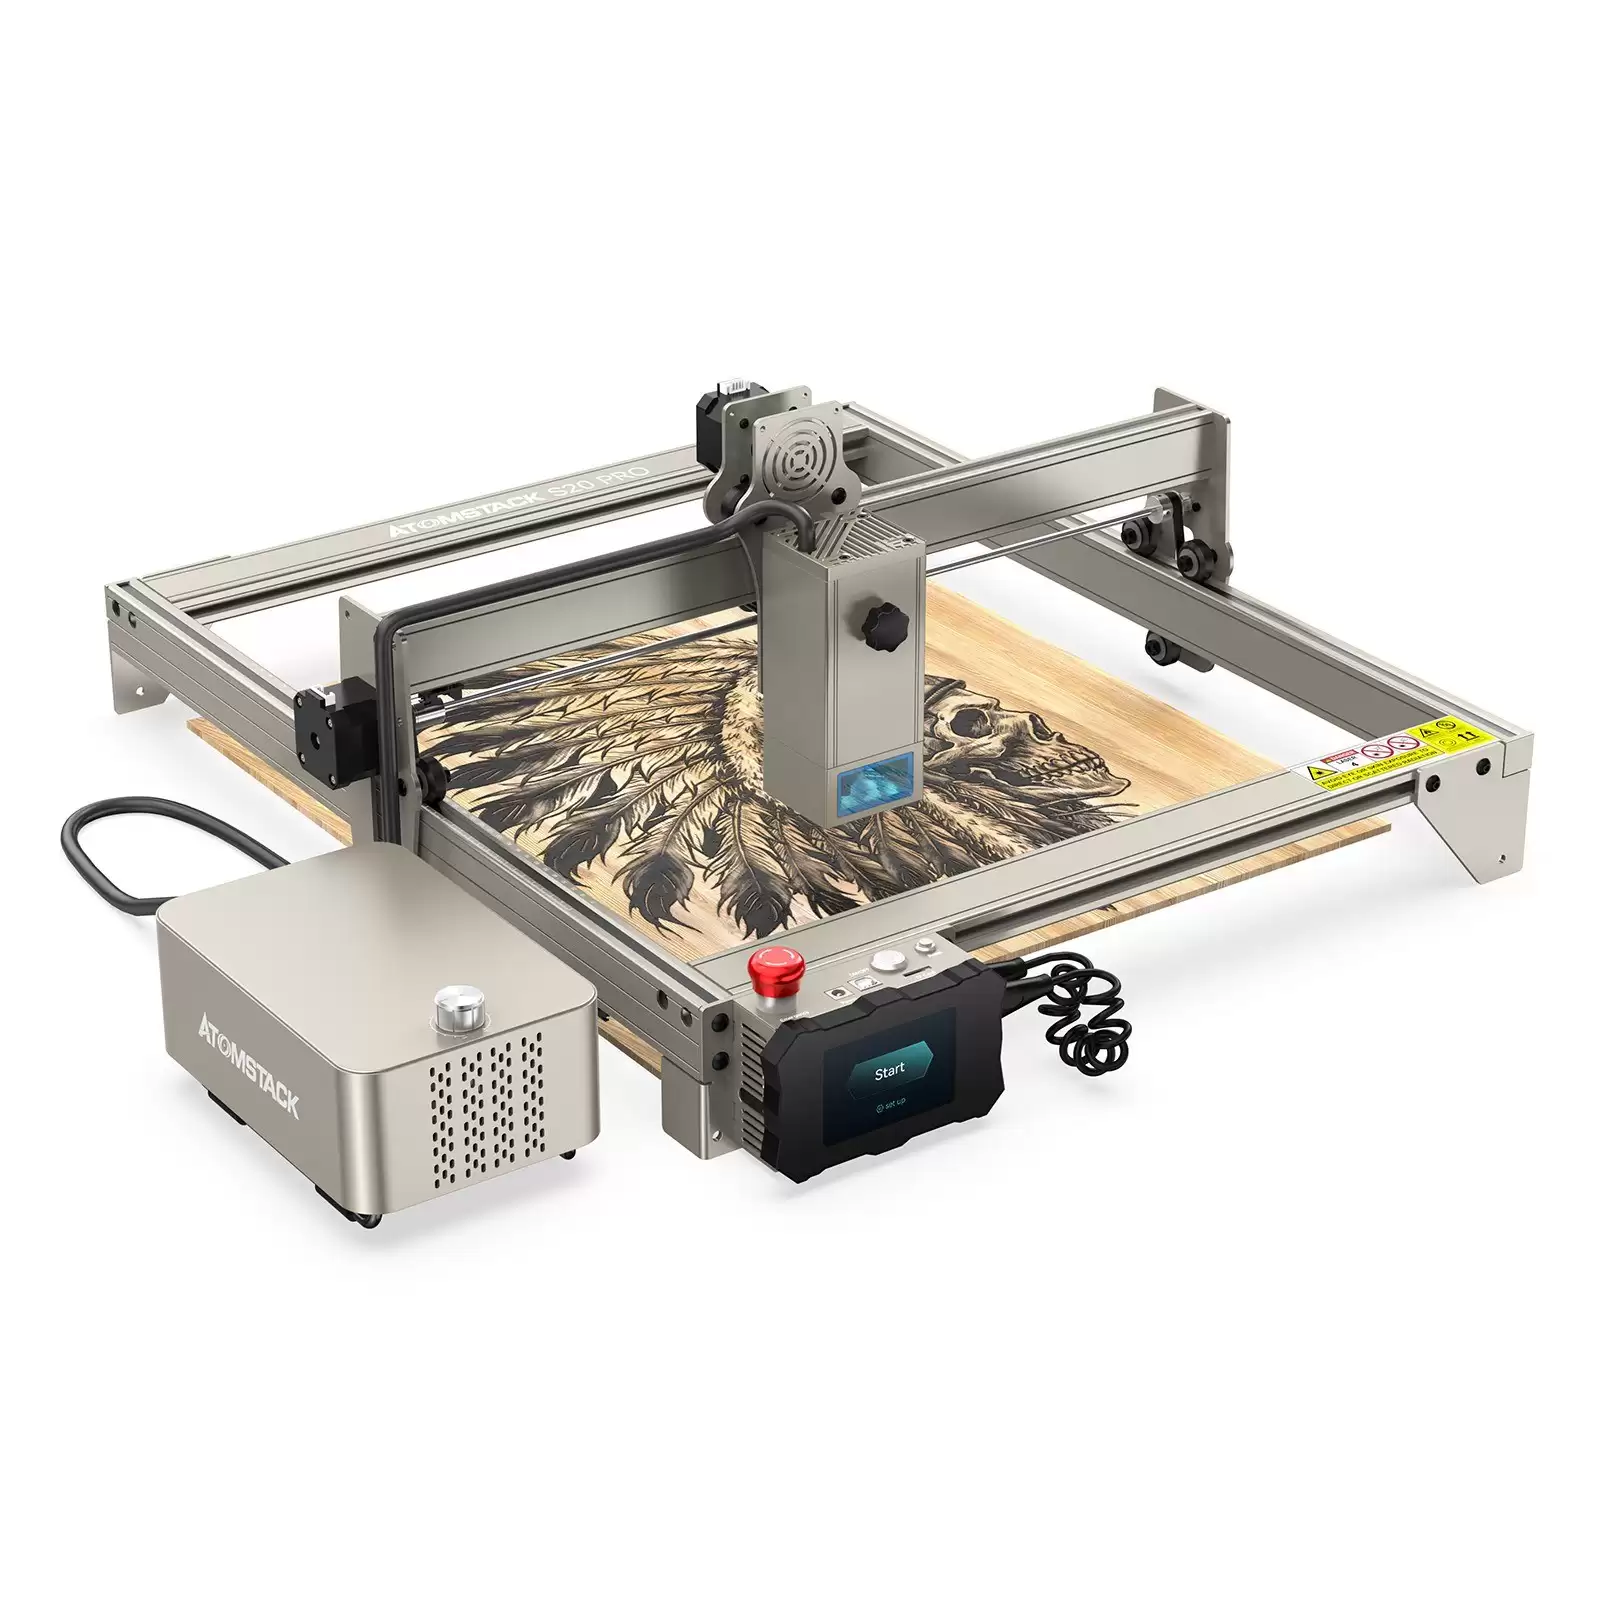 Order In Just $485 Atomstack S20 Pro 20w Laser Engraver With Air Assist Accessory With This Discount Coupon At Cafago